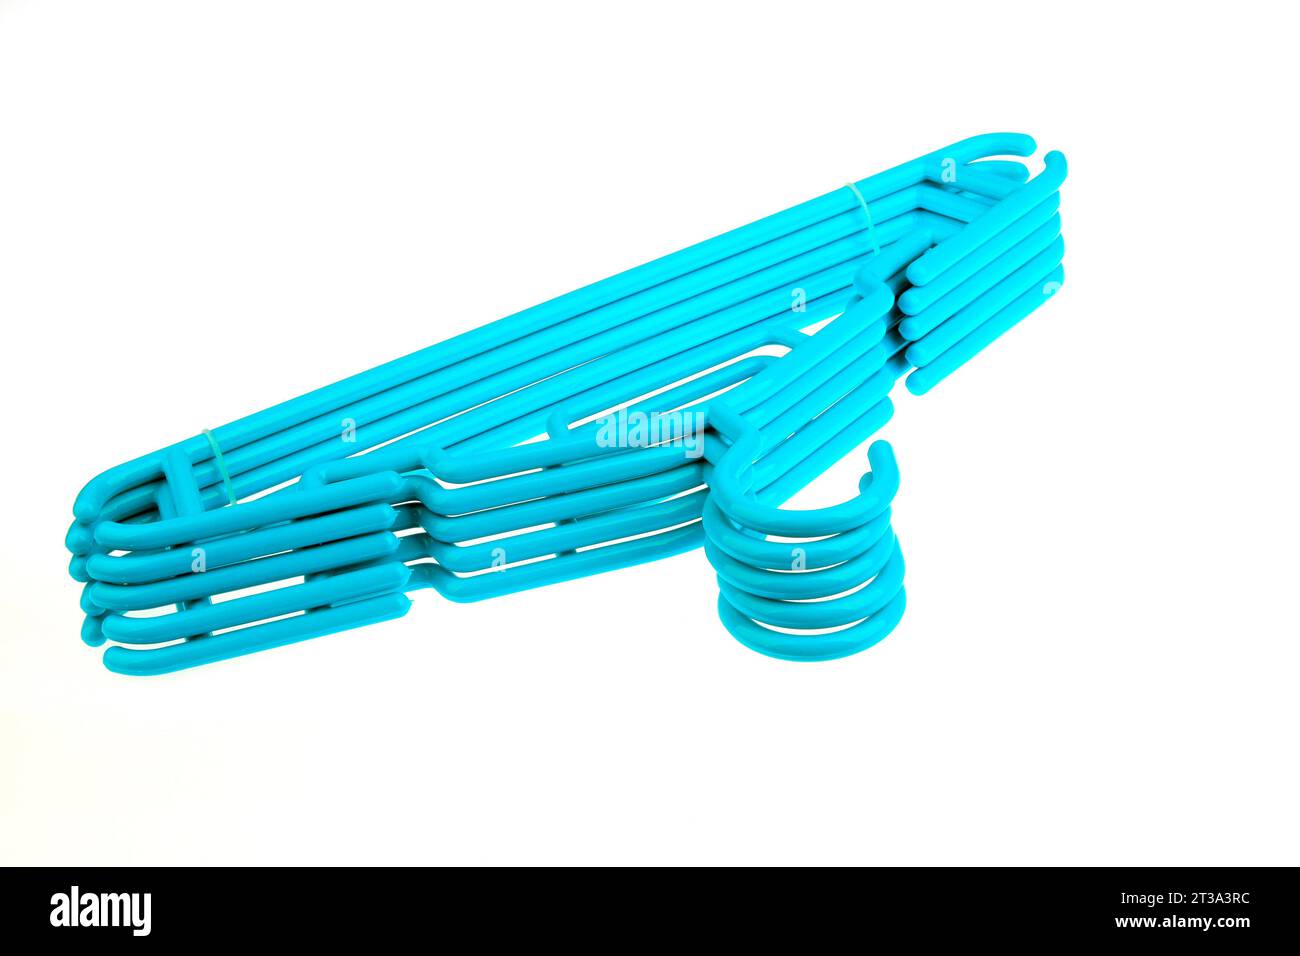 blue plastic hangers on a white background Stock Photo